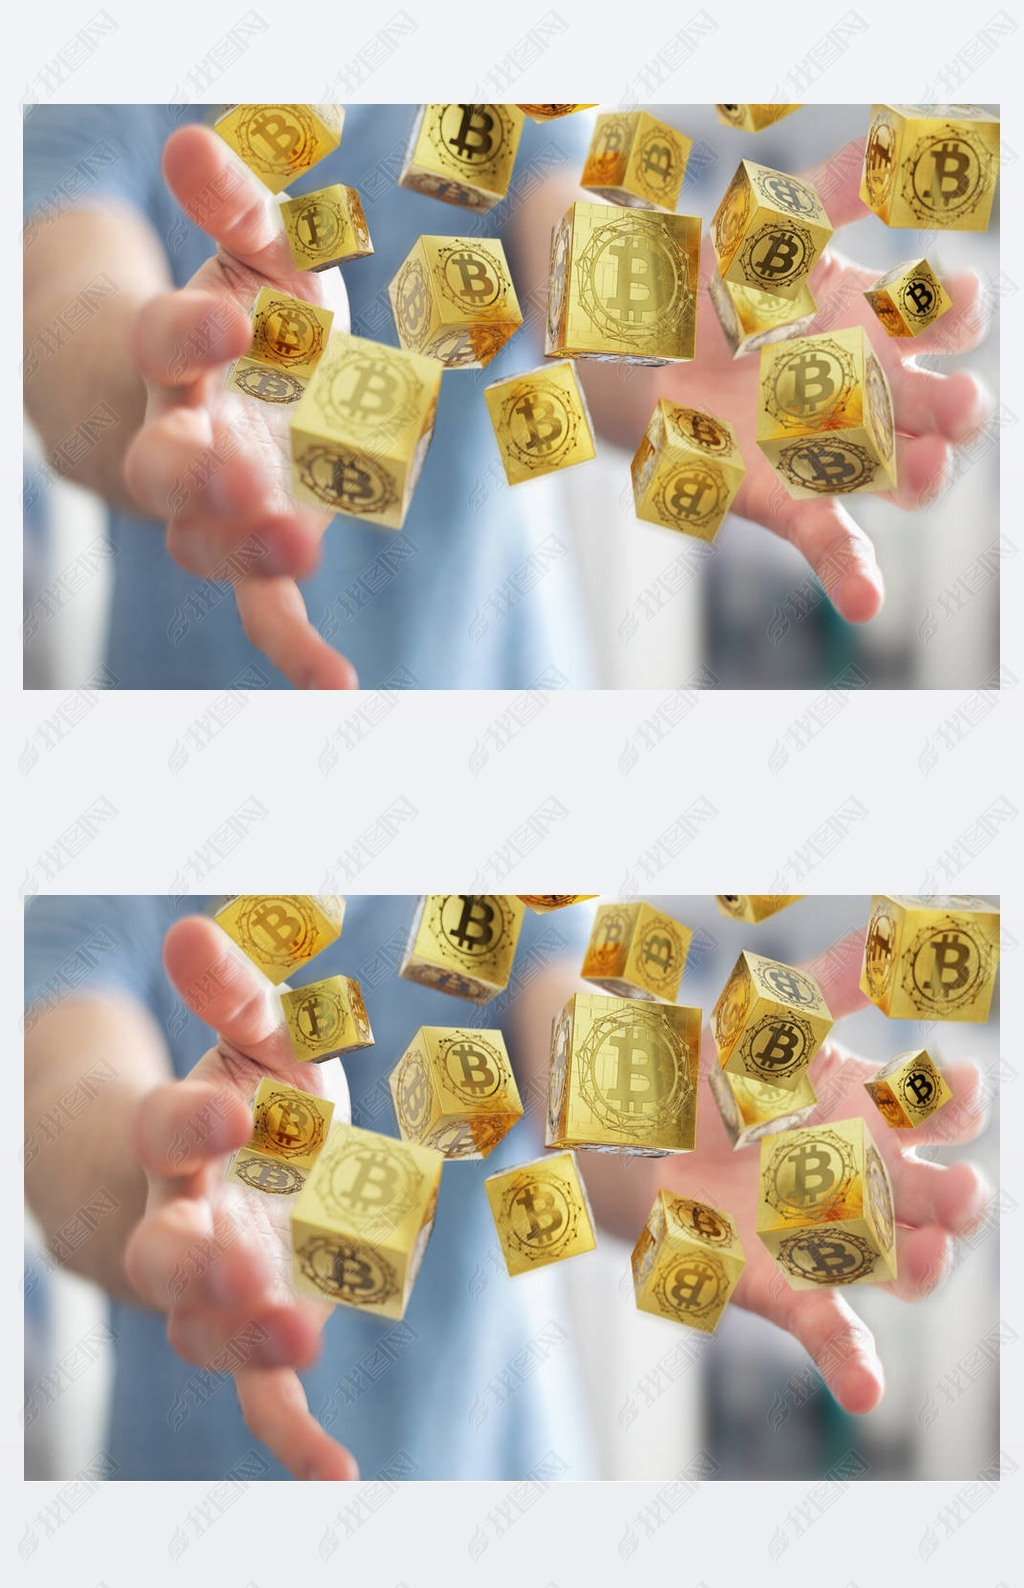 ʹñ cryptocurrency 3d Ⱦ